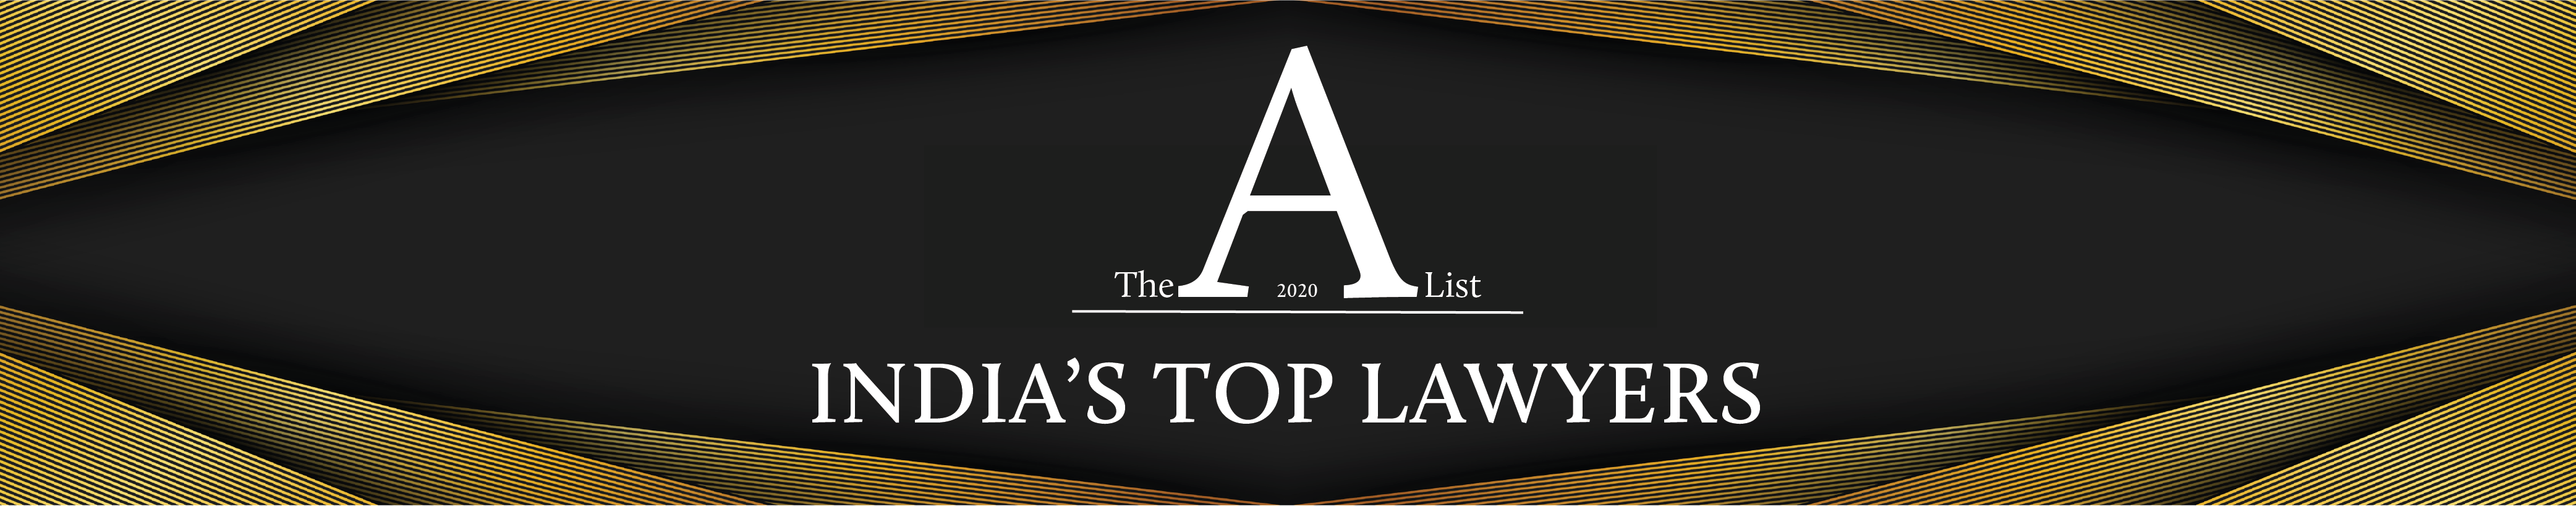 India A-list 2020 top Indian lawyers